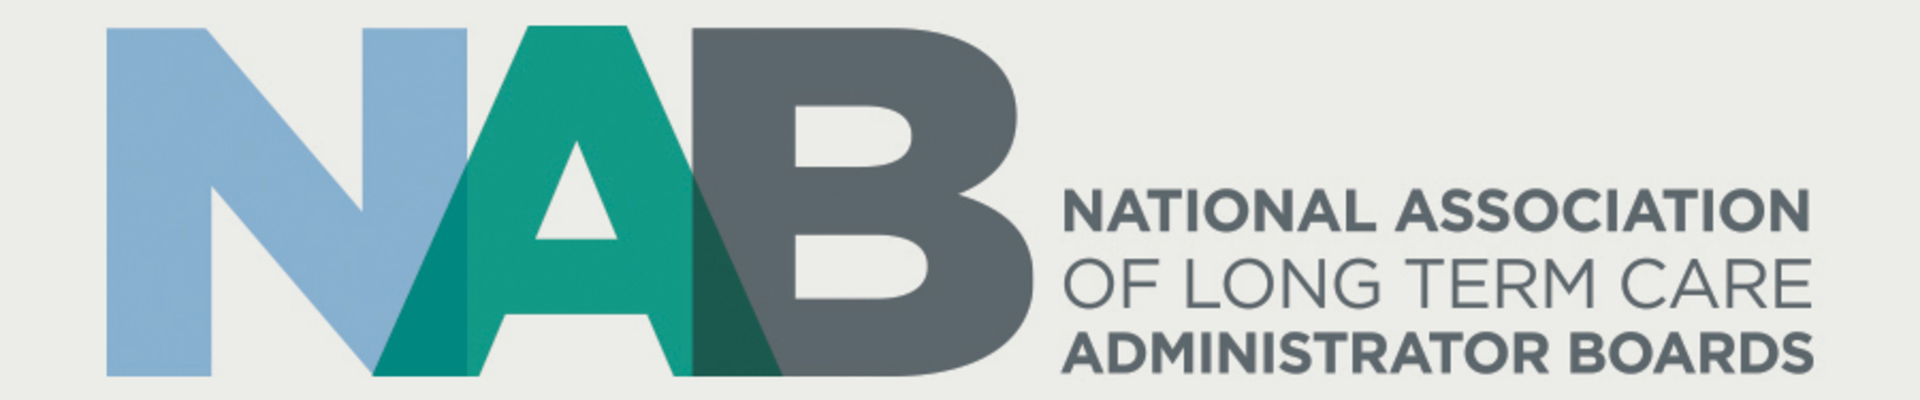 NAB National Association of long term care Administrator Boards